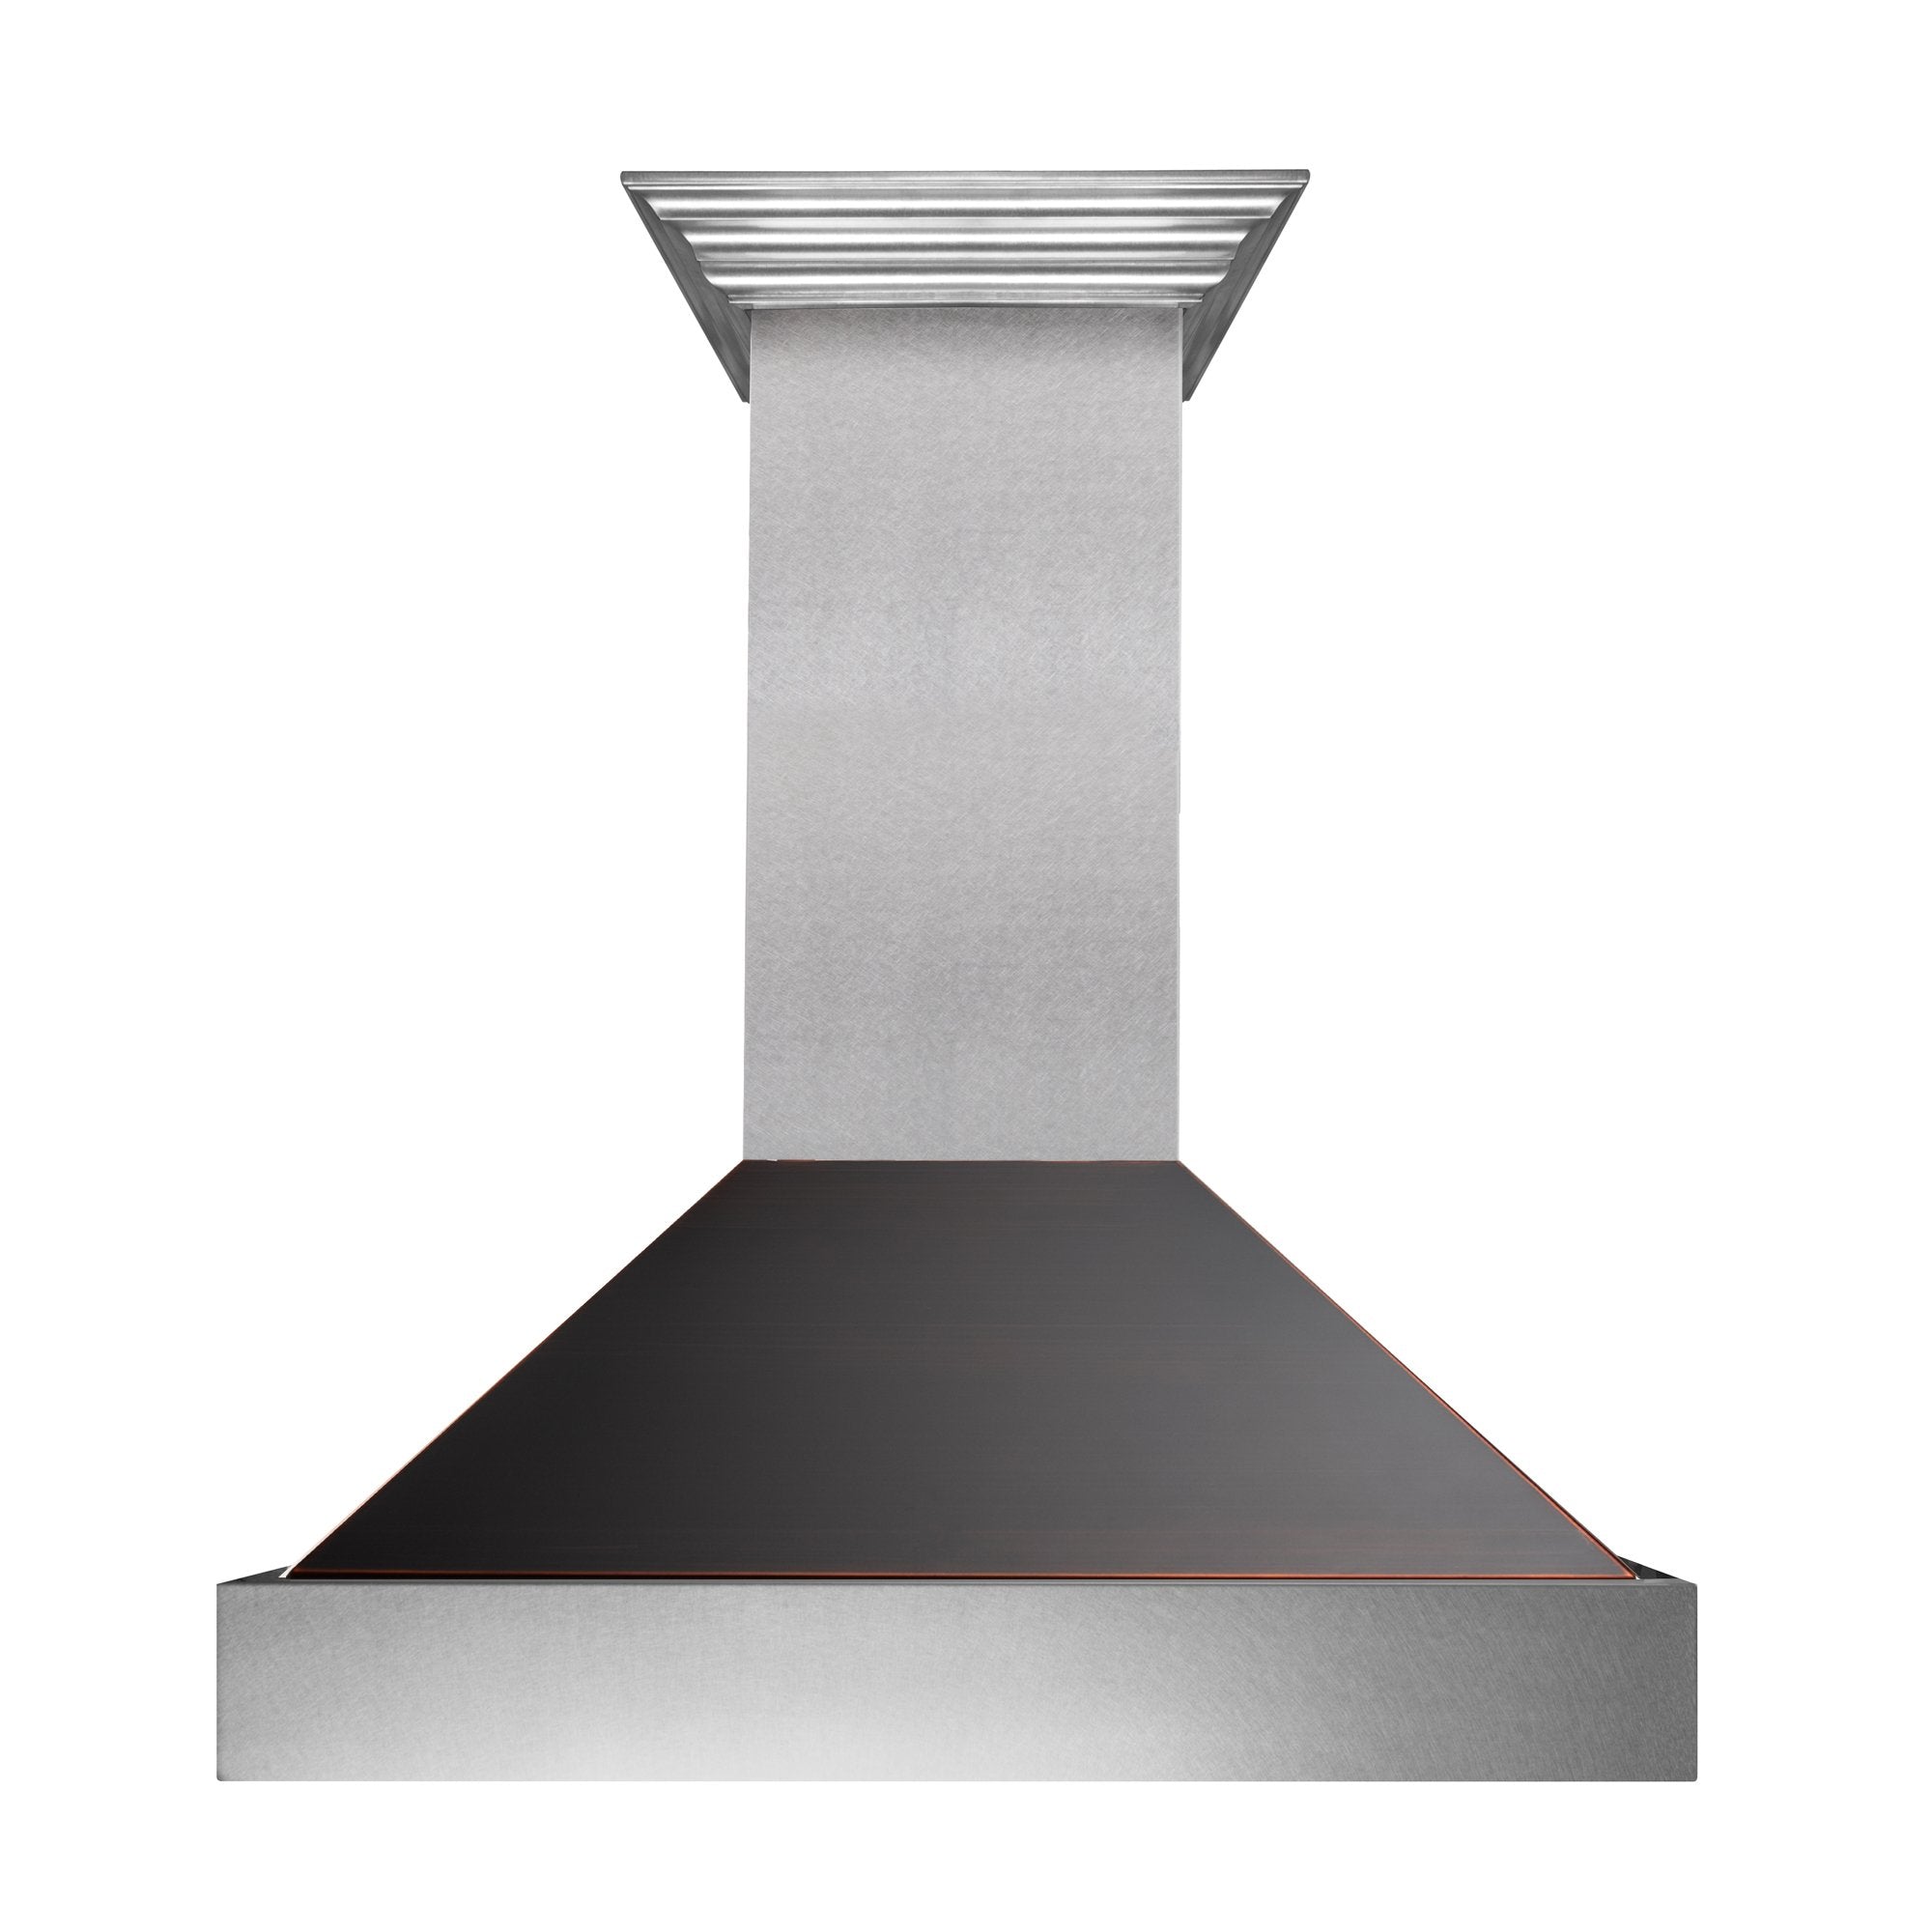 ZLINE Ducted DuraSnow Stainless Steel Range Hood with Oil Rubbed Bronze Shell (8654ORB) - New Star Living